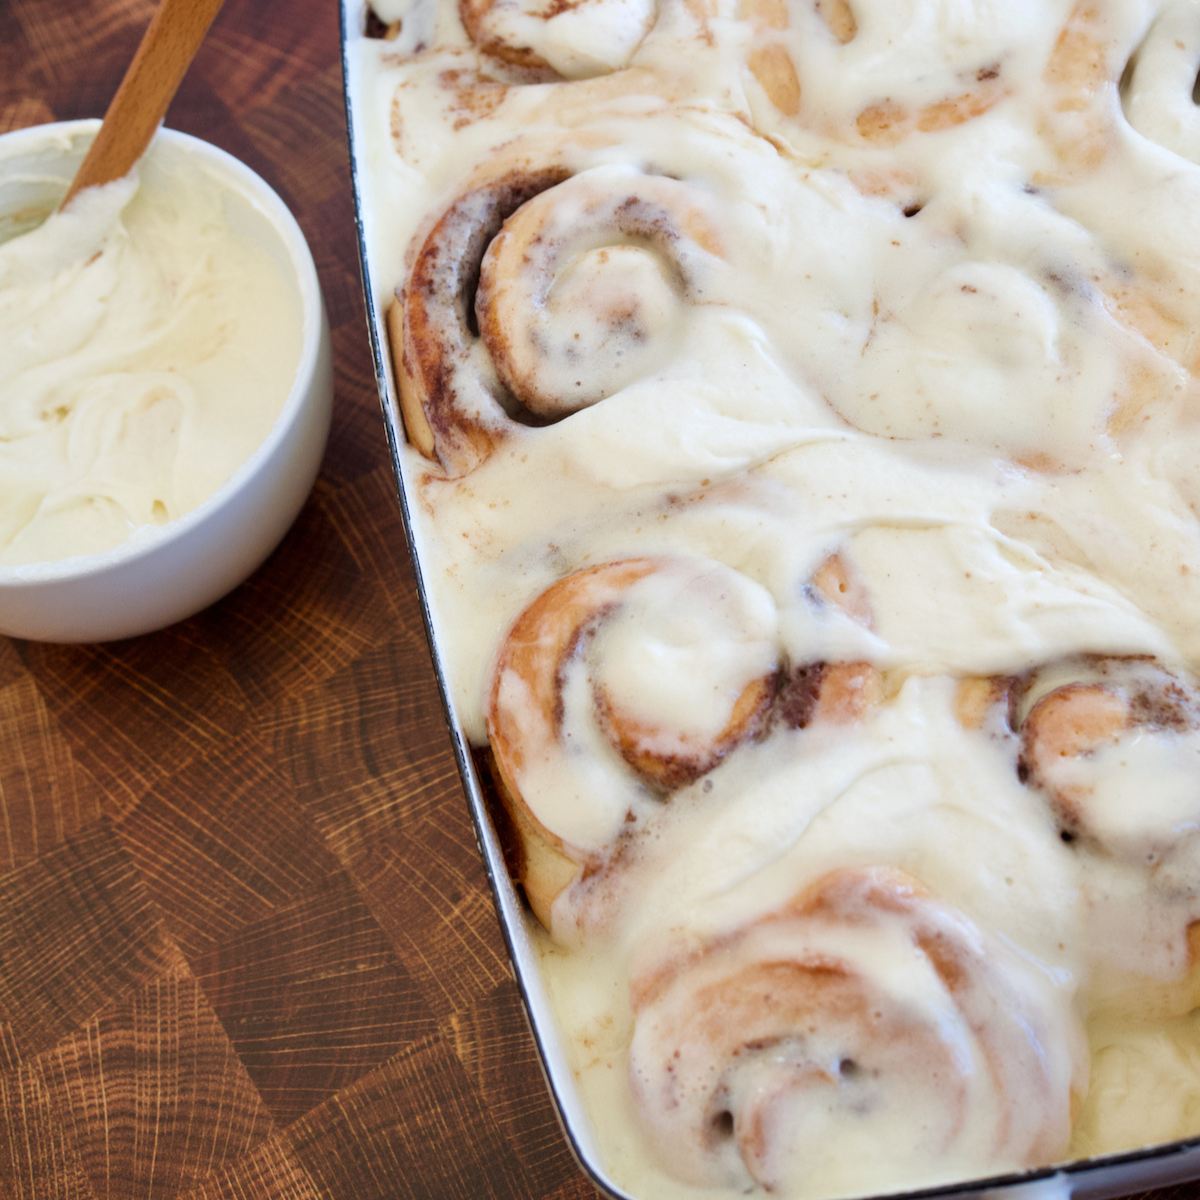 Pan of frosted gooey cinnamon rolls with bowl of frosting nearby.